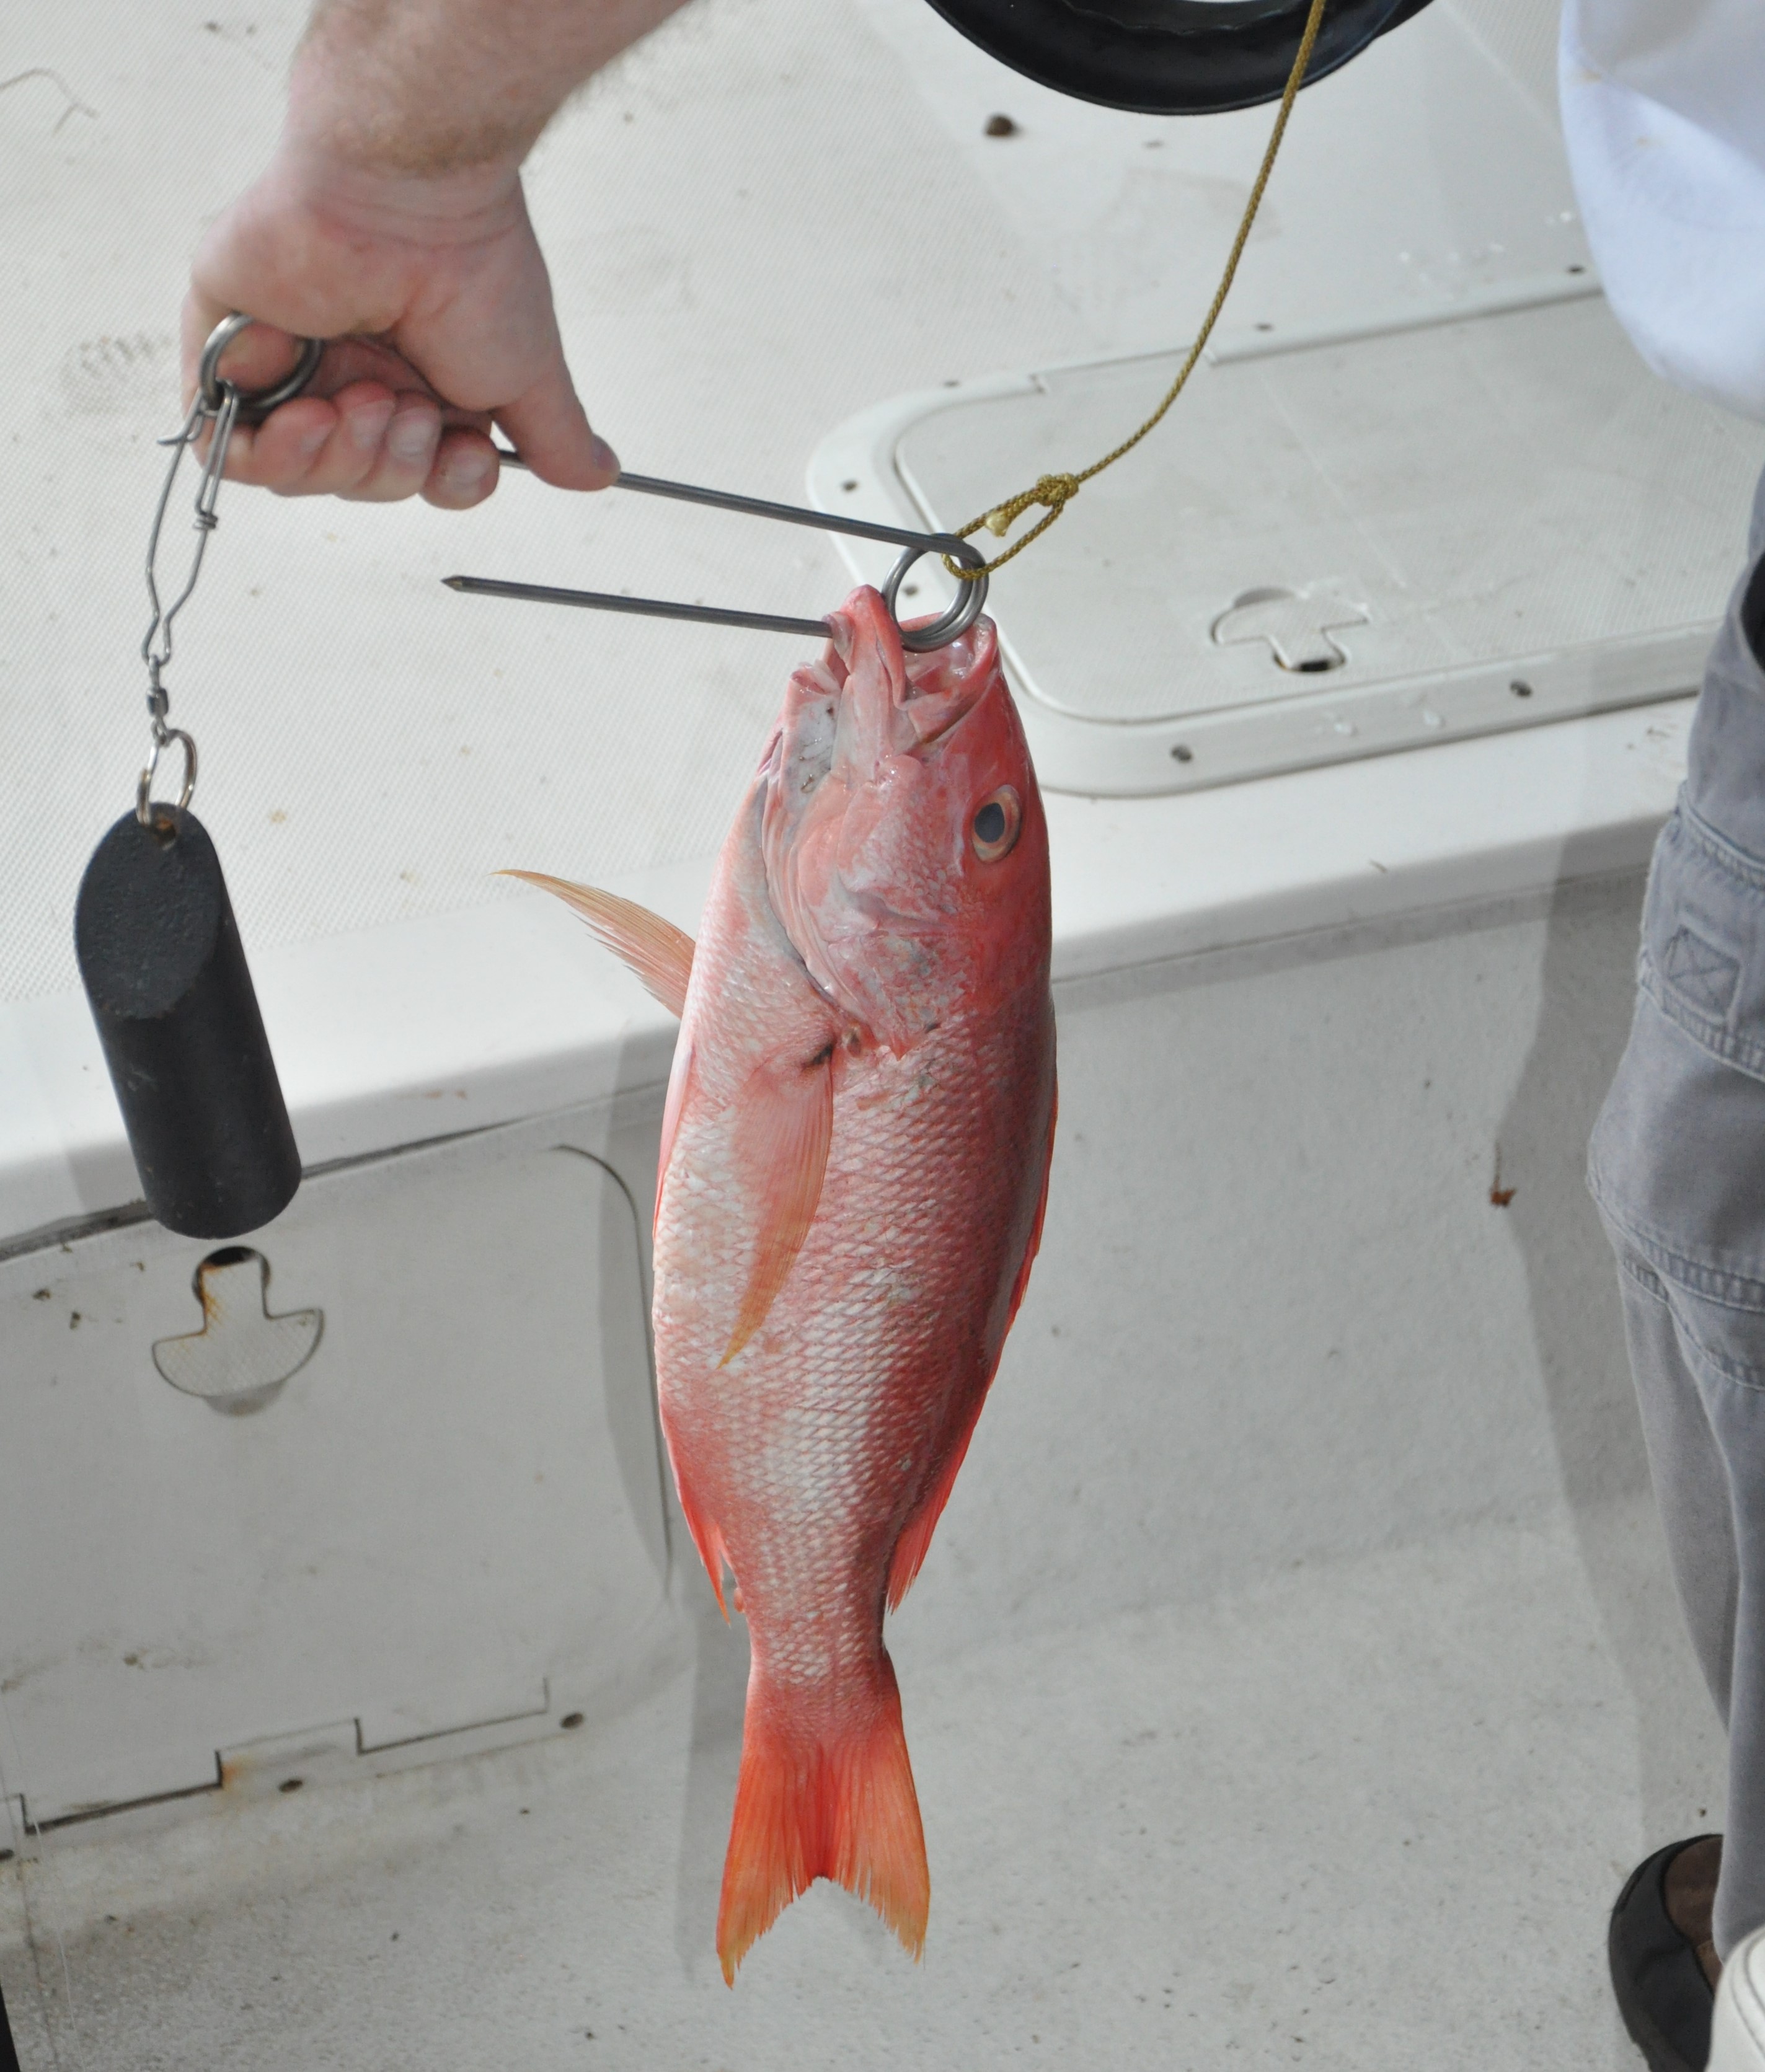 FWC: Anglers Now Required to Have a Descending Device or Venting